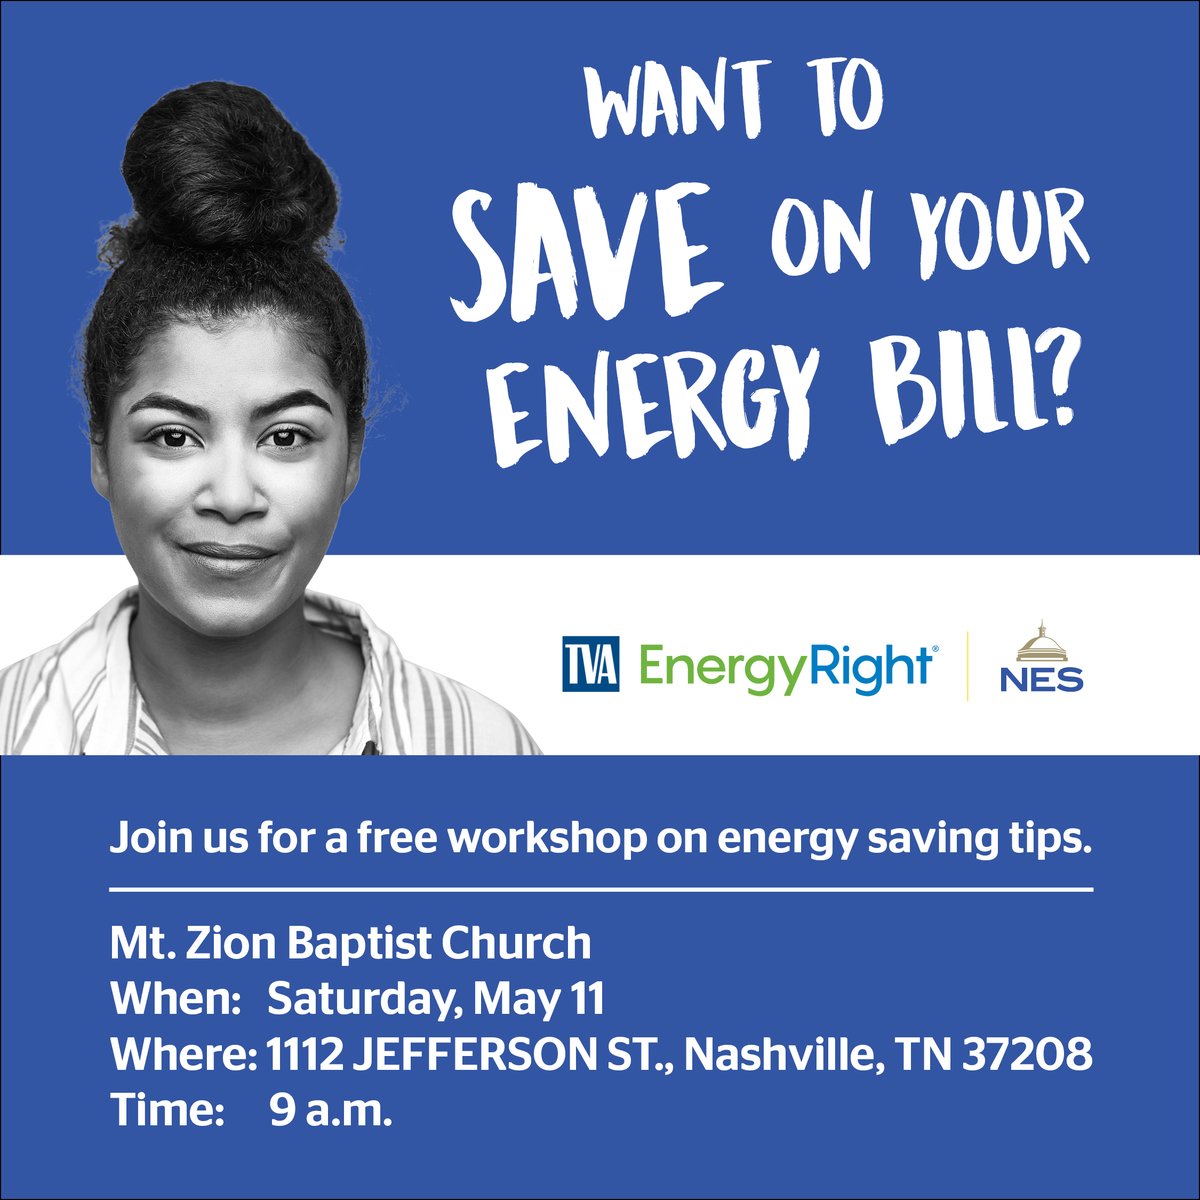 Want to save on your energy bill? We’re here to help you learn how. Join us at 9 a.m. this Saturday at Mt. Zion Baptist Church on Jefferson St. for a free workshop on energy-saving tips.